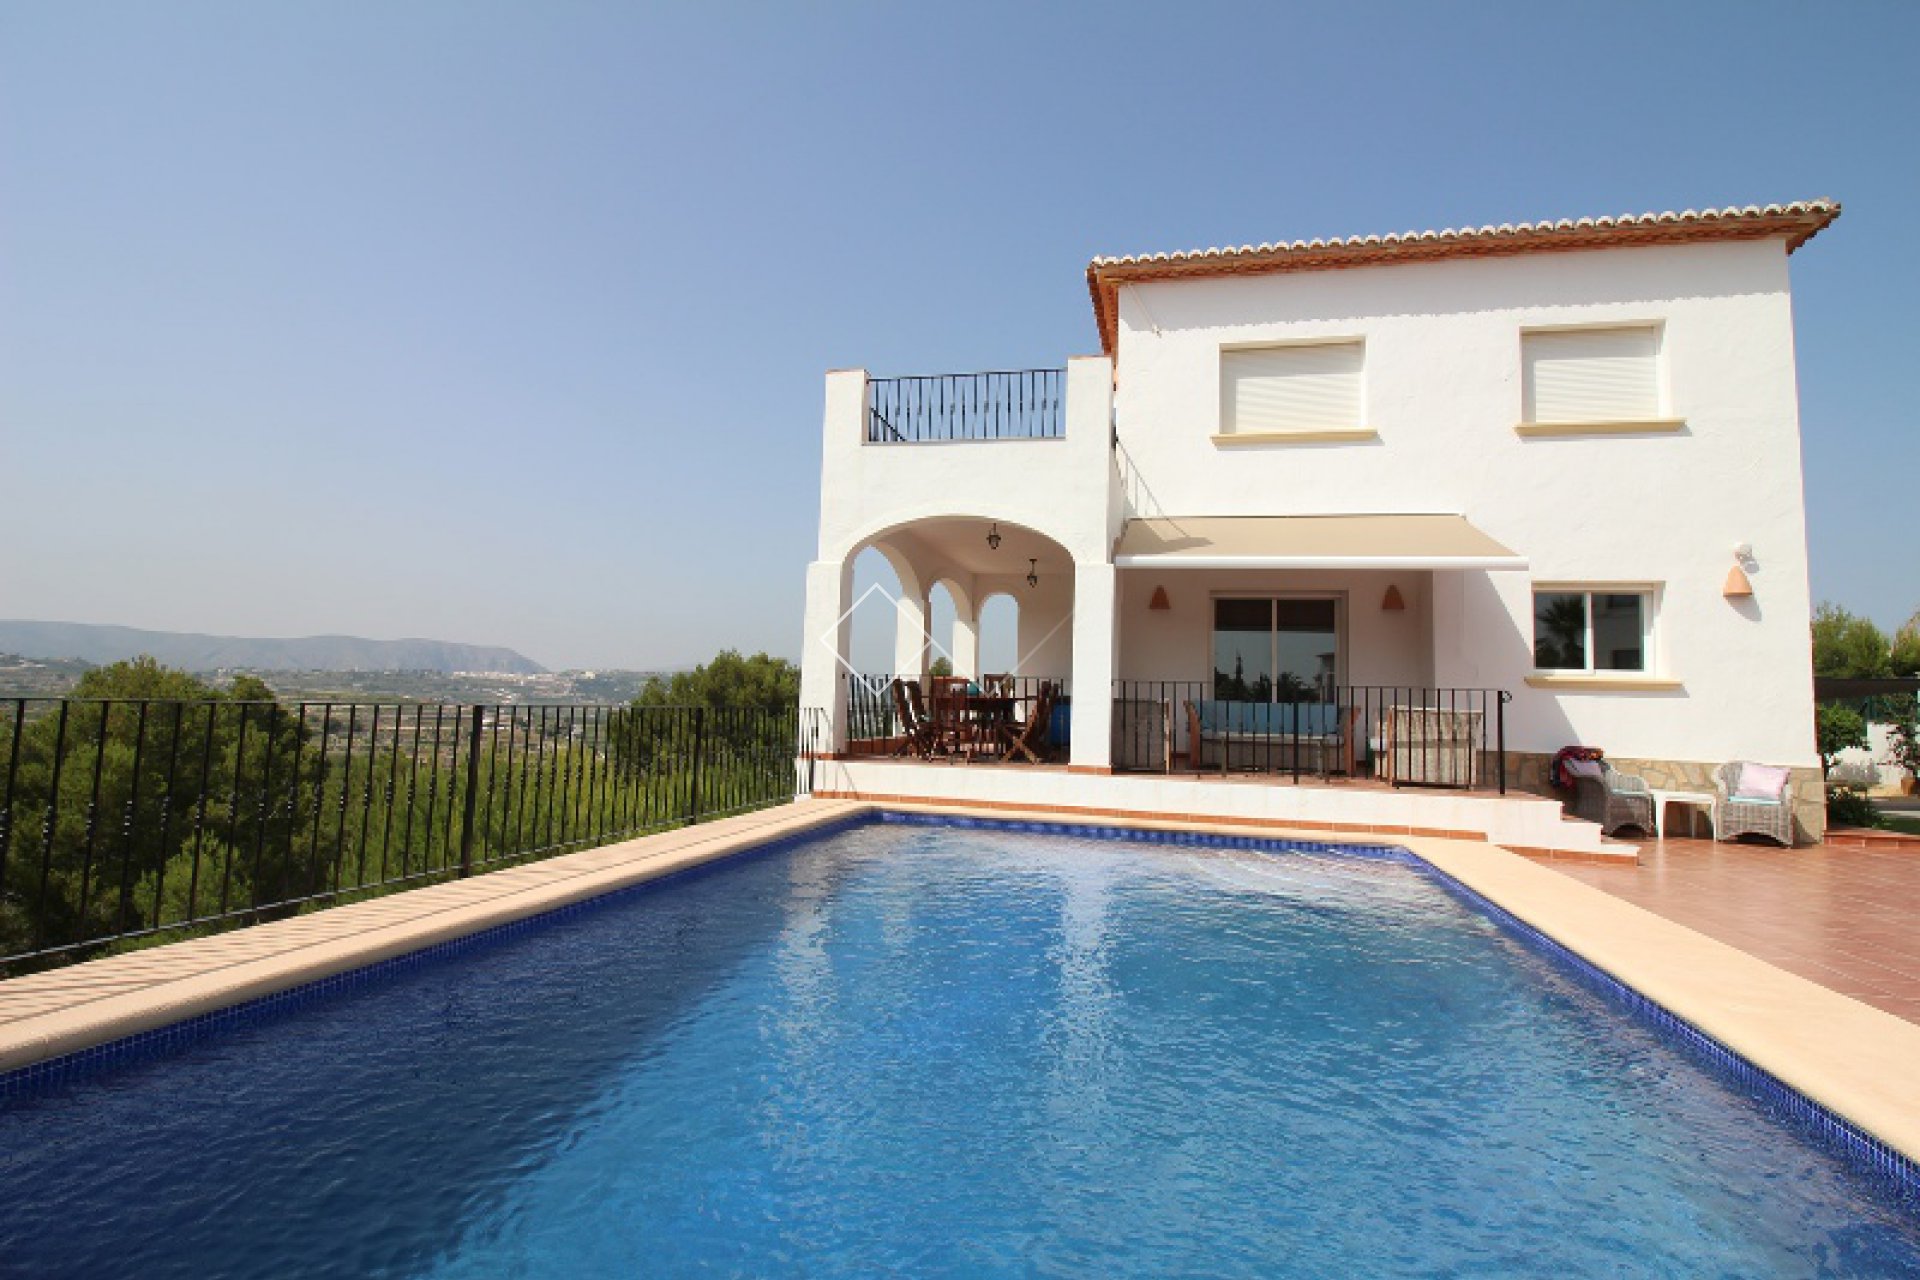 pool and house - Villa in Benimeit Moraira with lovely rural views